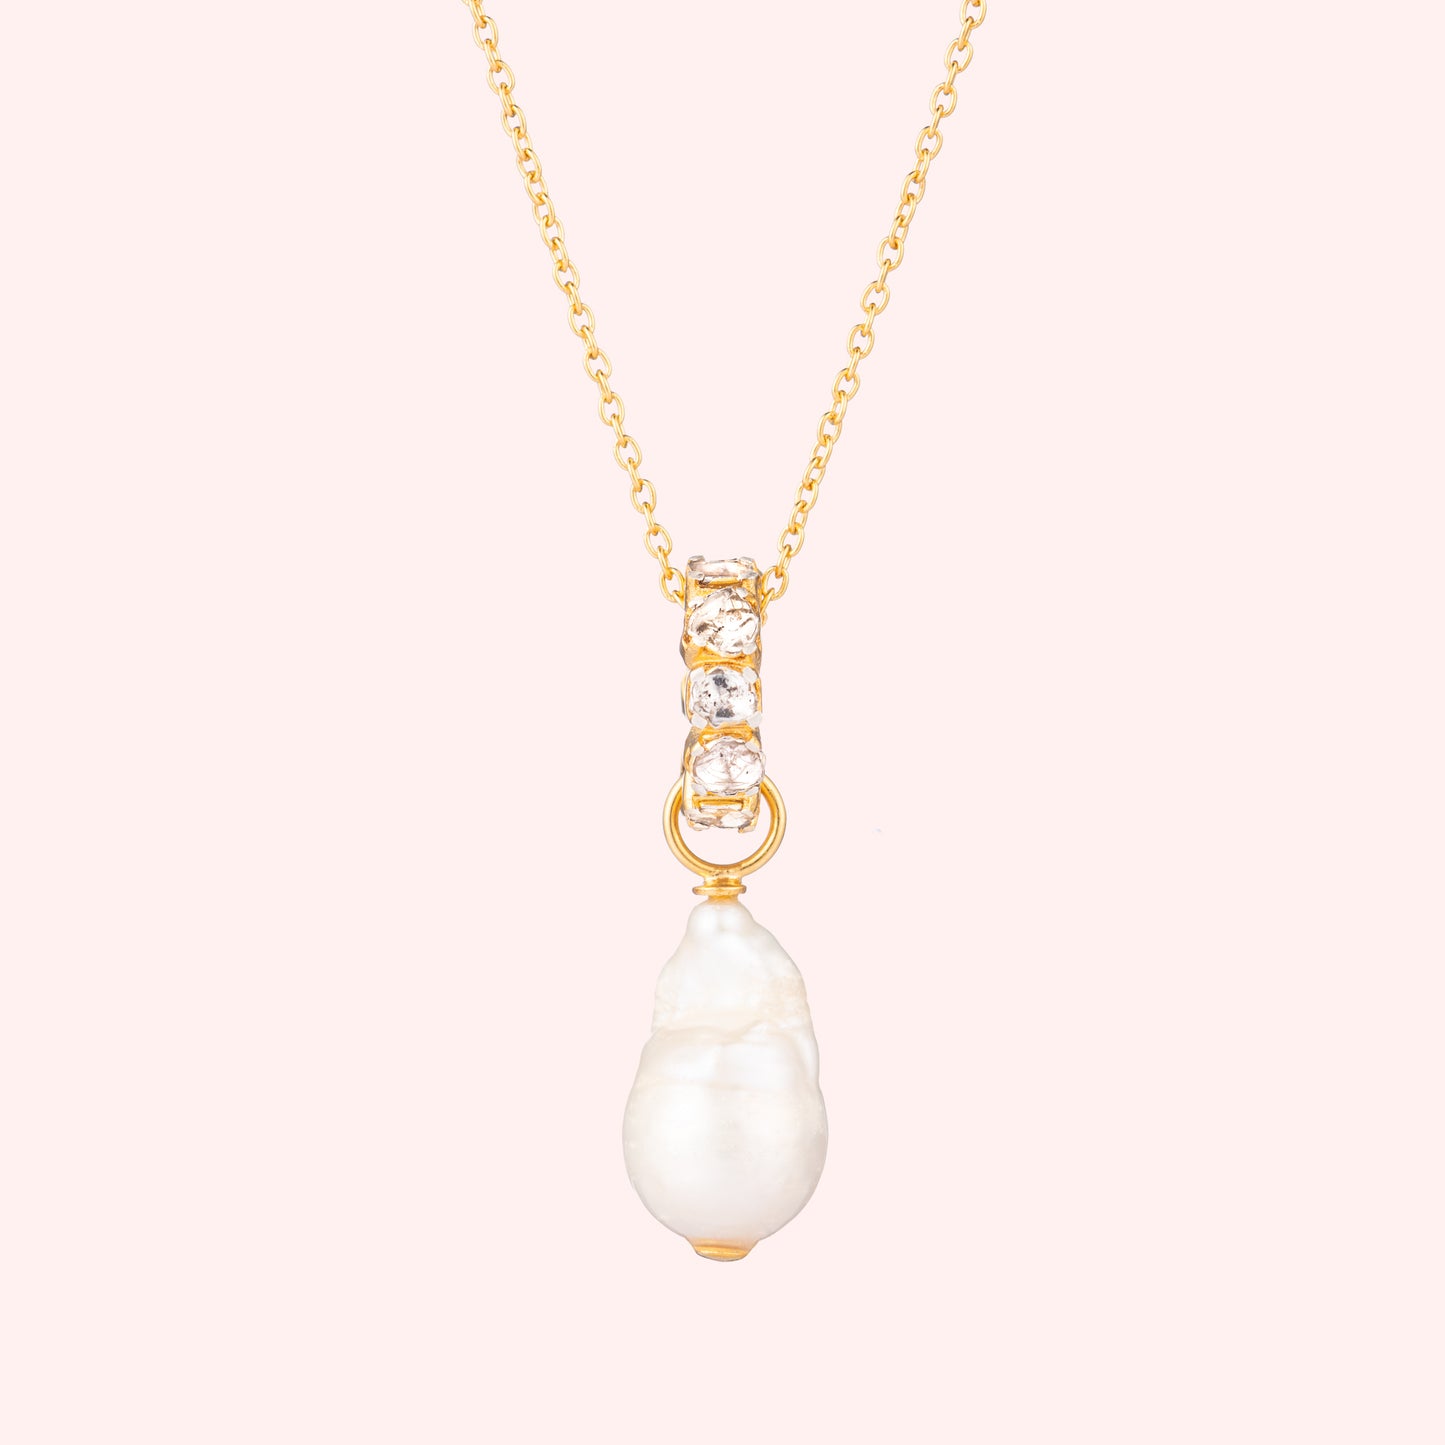 Salt & Pepper Diamond with Baroque Pearl with 22K Gold Vermeil necklace